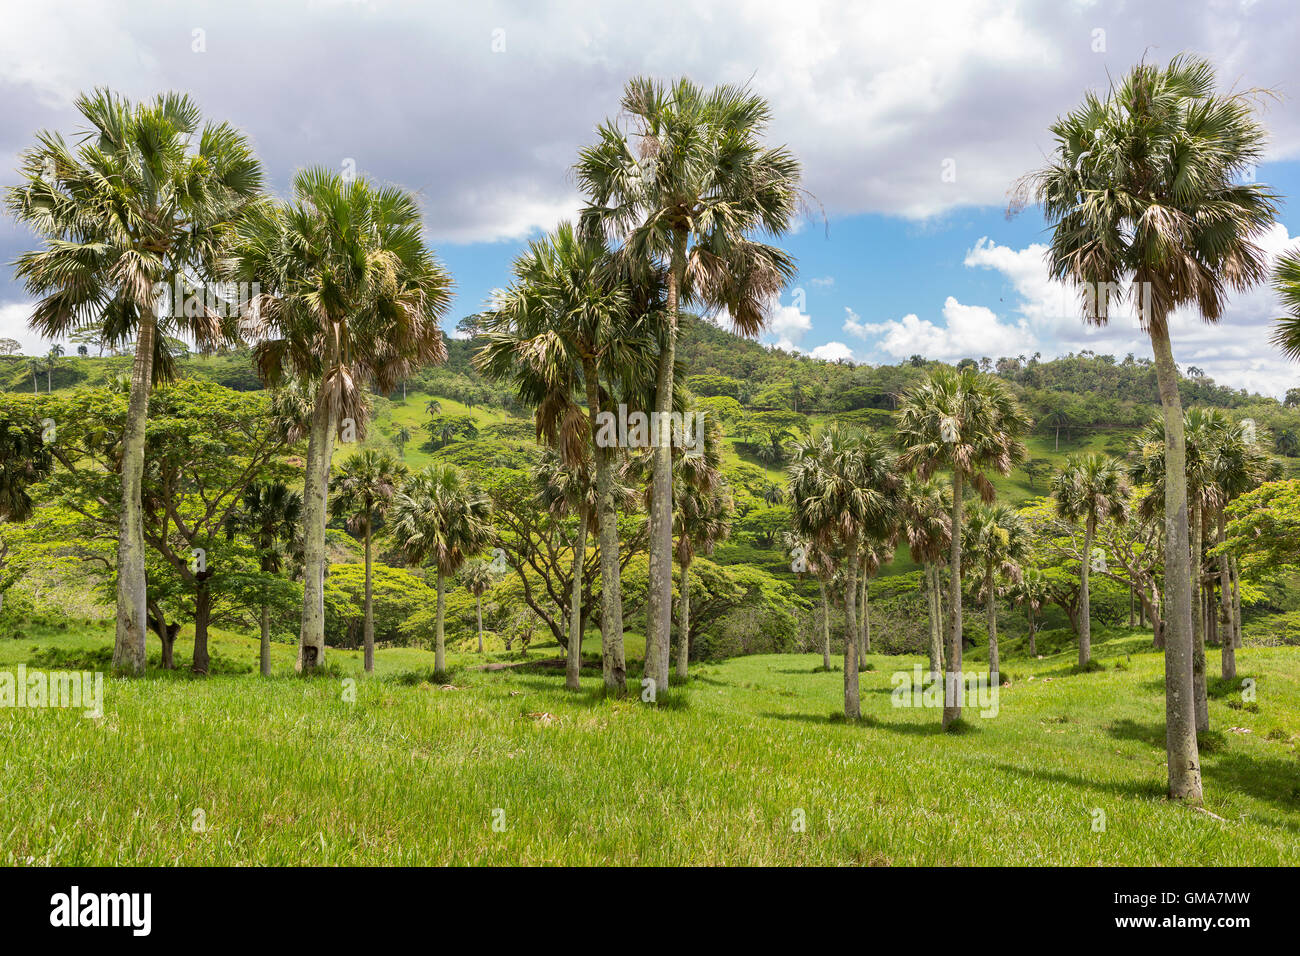 DOMINICAN REPUBLIC - Landscape in mountains with palm trees Stock Photo